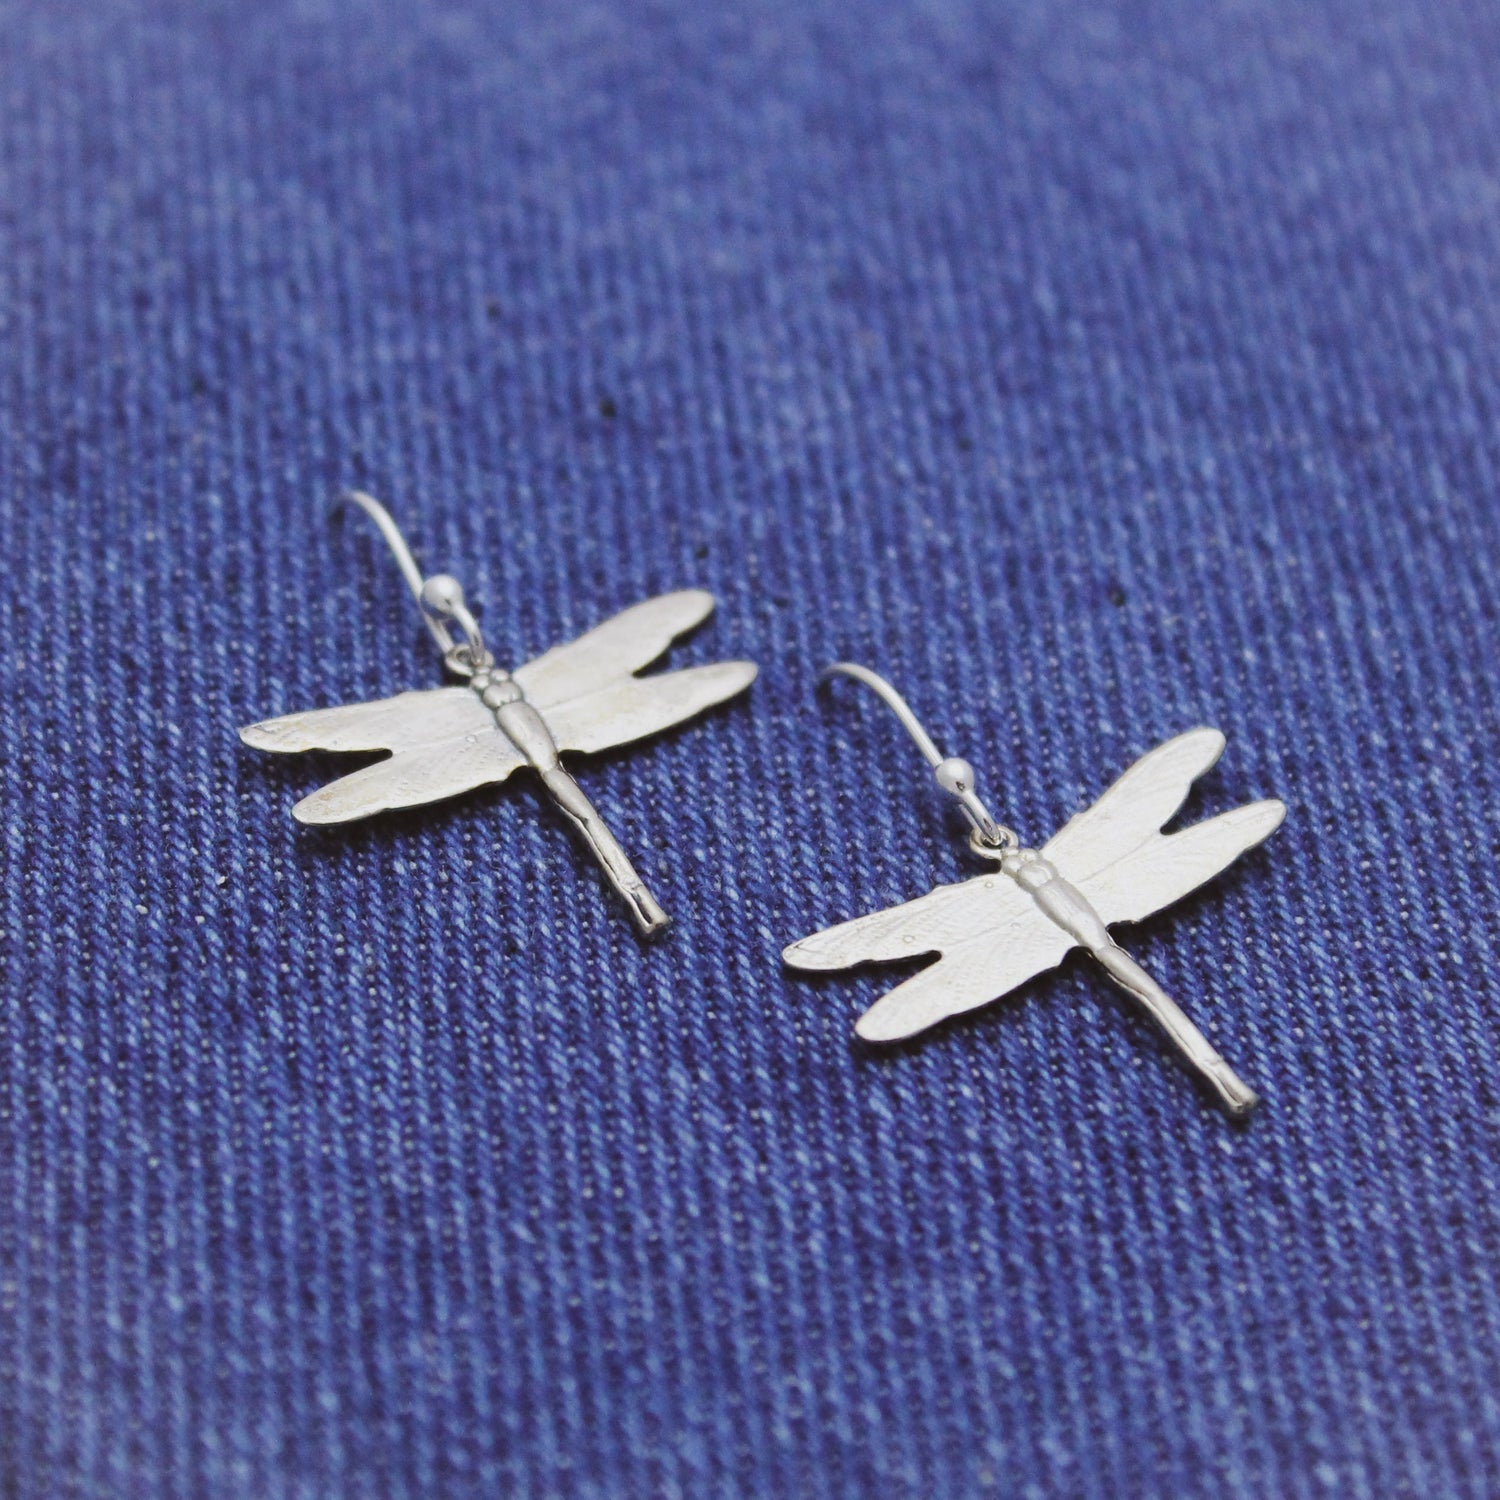 Cute Dragonfly Earrings, Sterling Silver Dragonfly Earrings, Spring Jewelry, Rustic Dragonfly Earrings, Mother's Day Gift, Gifts for Her